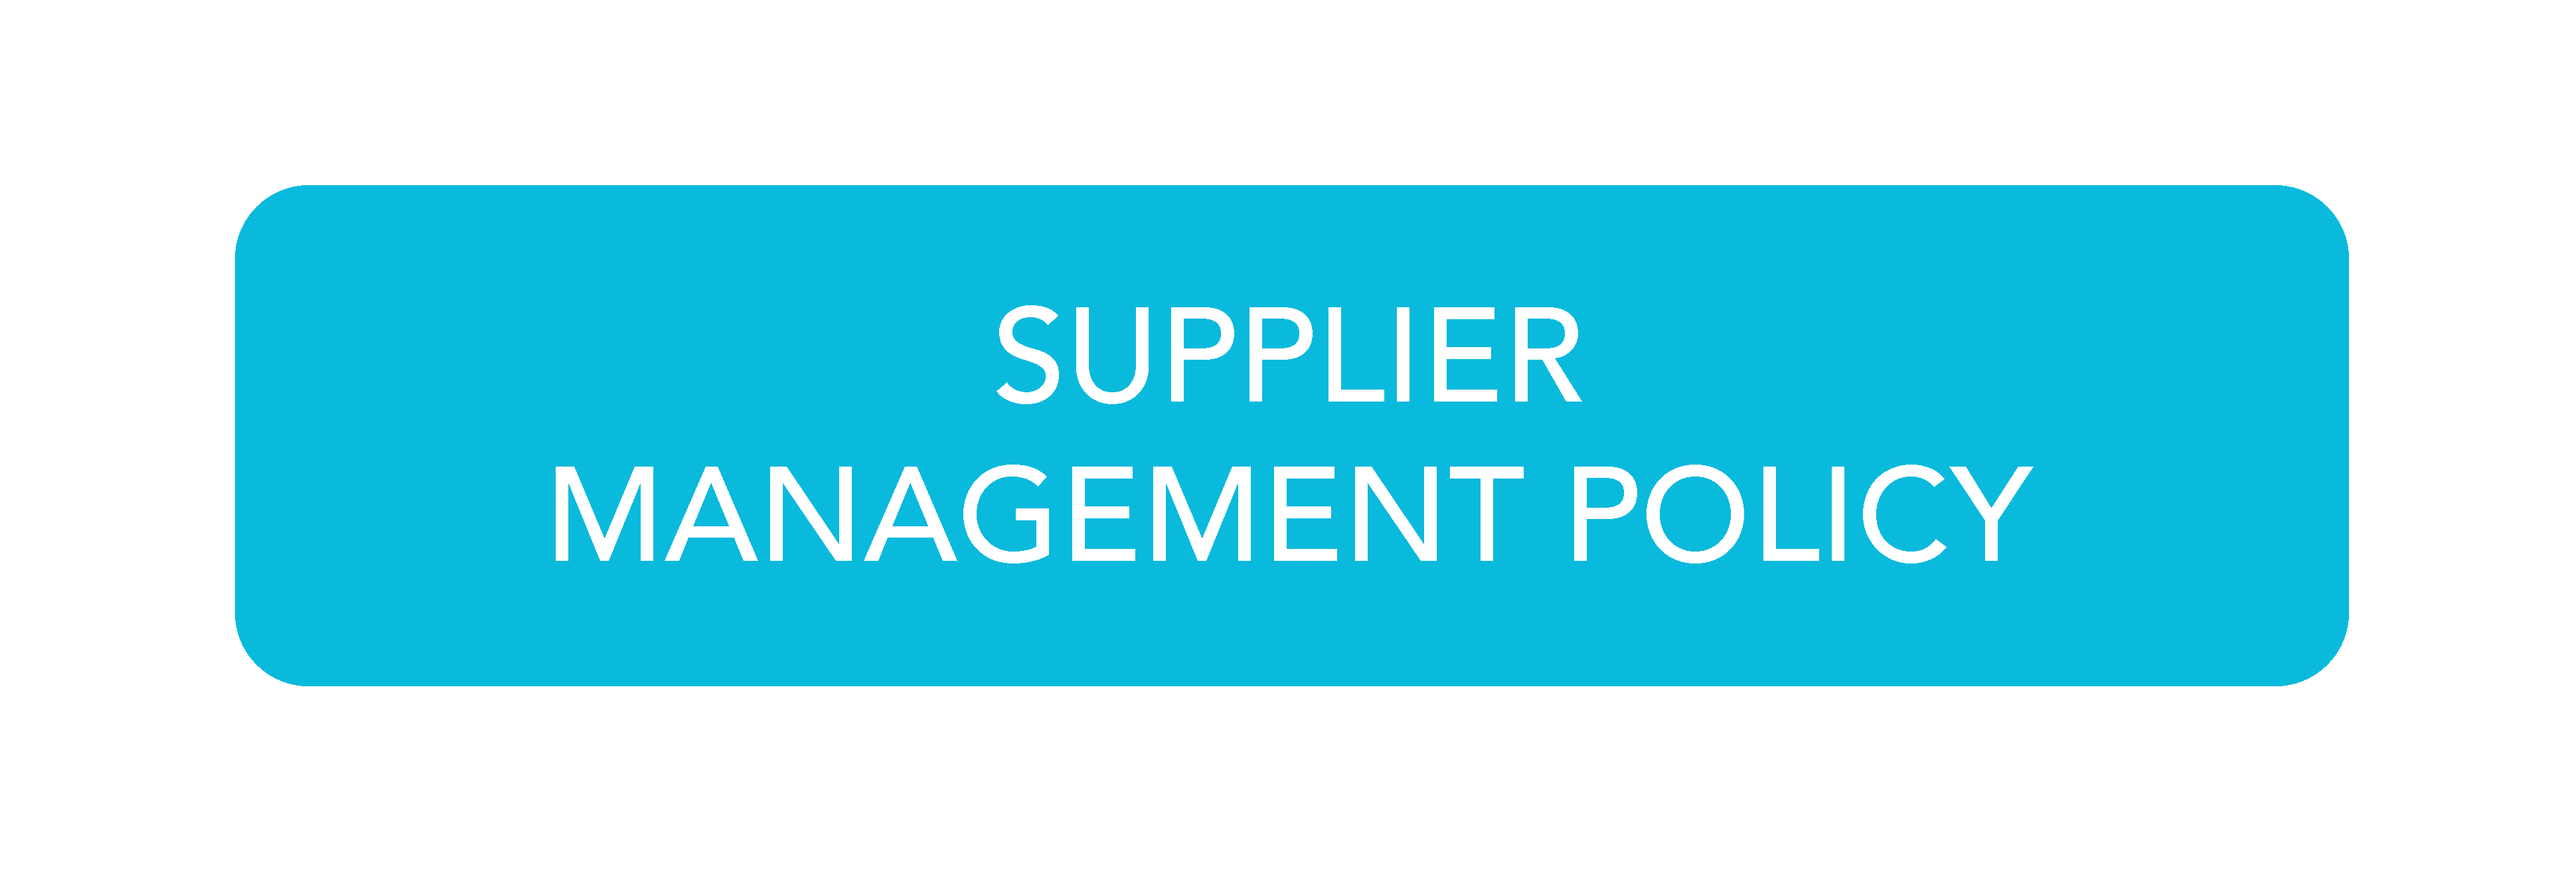 SUPPLIER MANAGEMENT POLICY.png